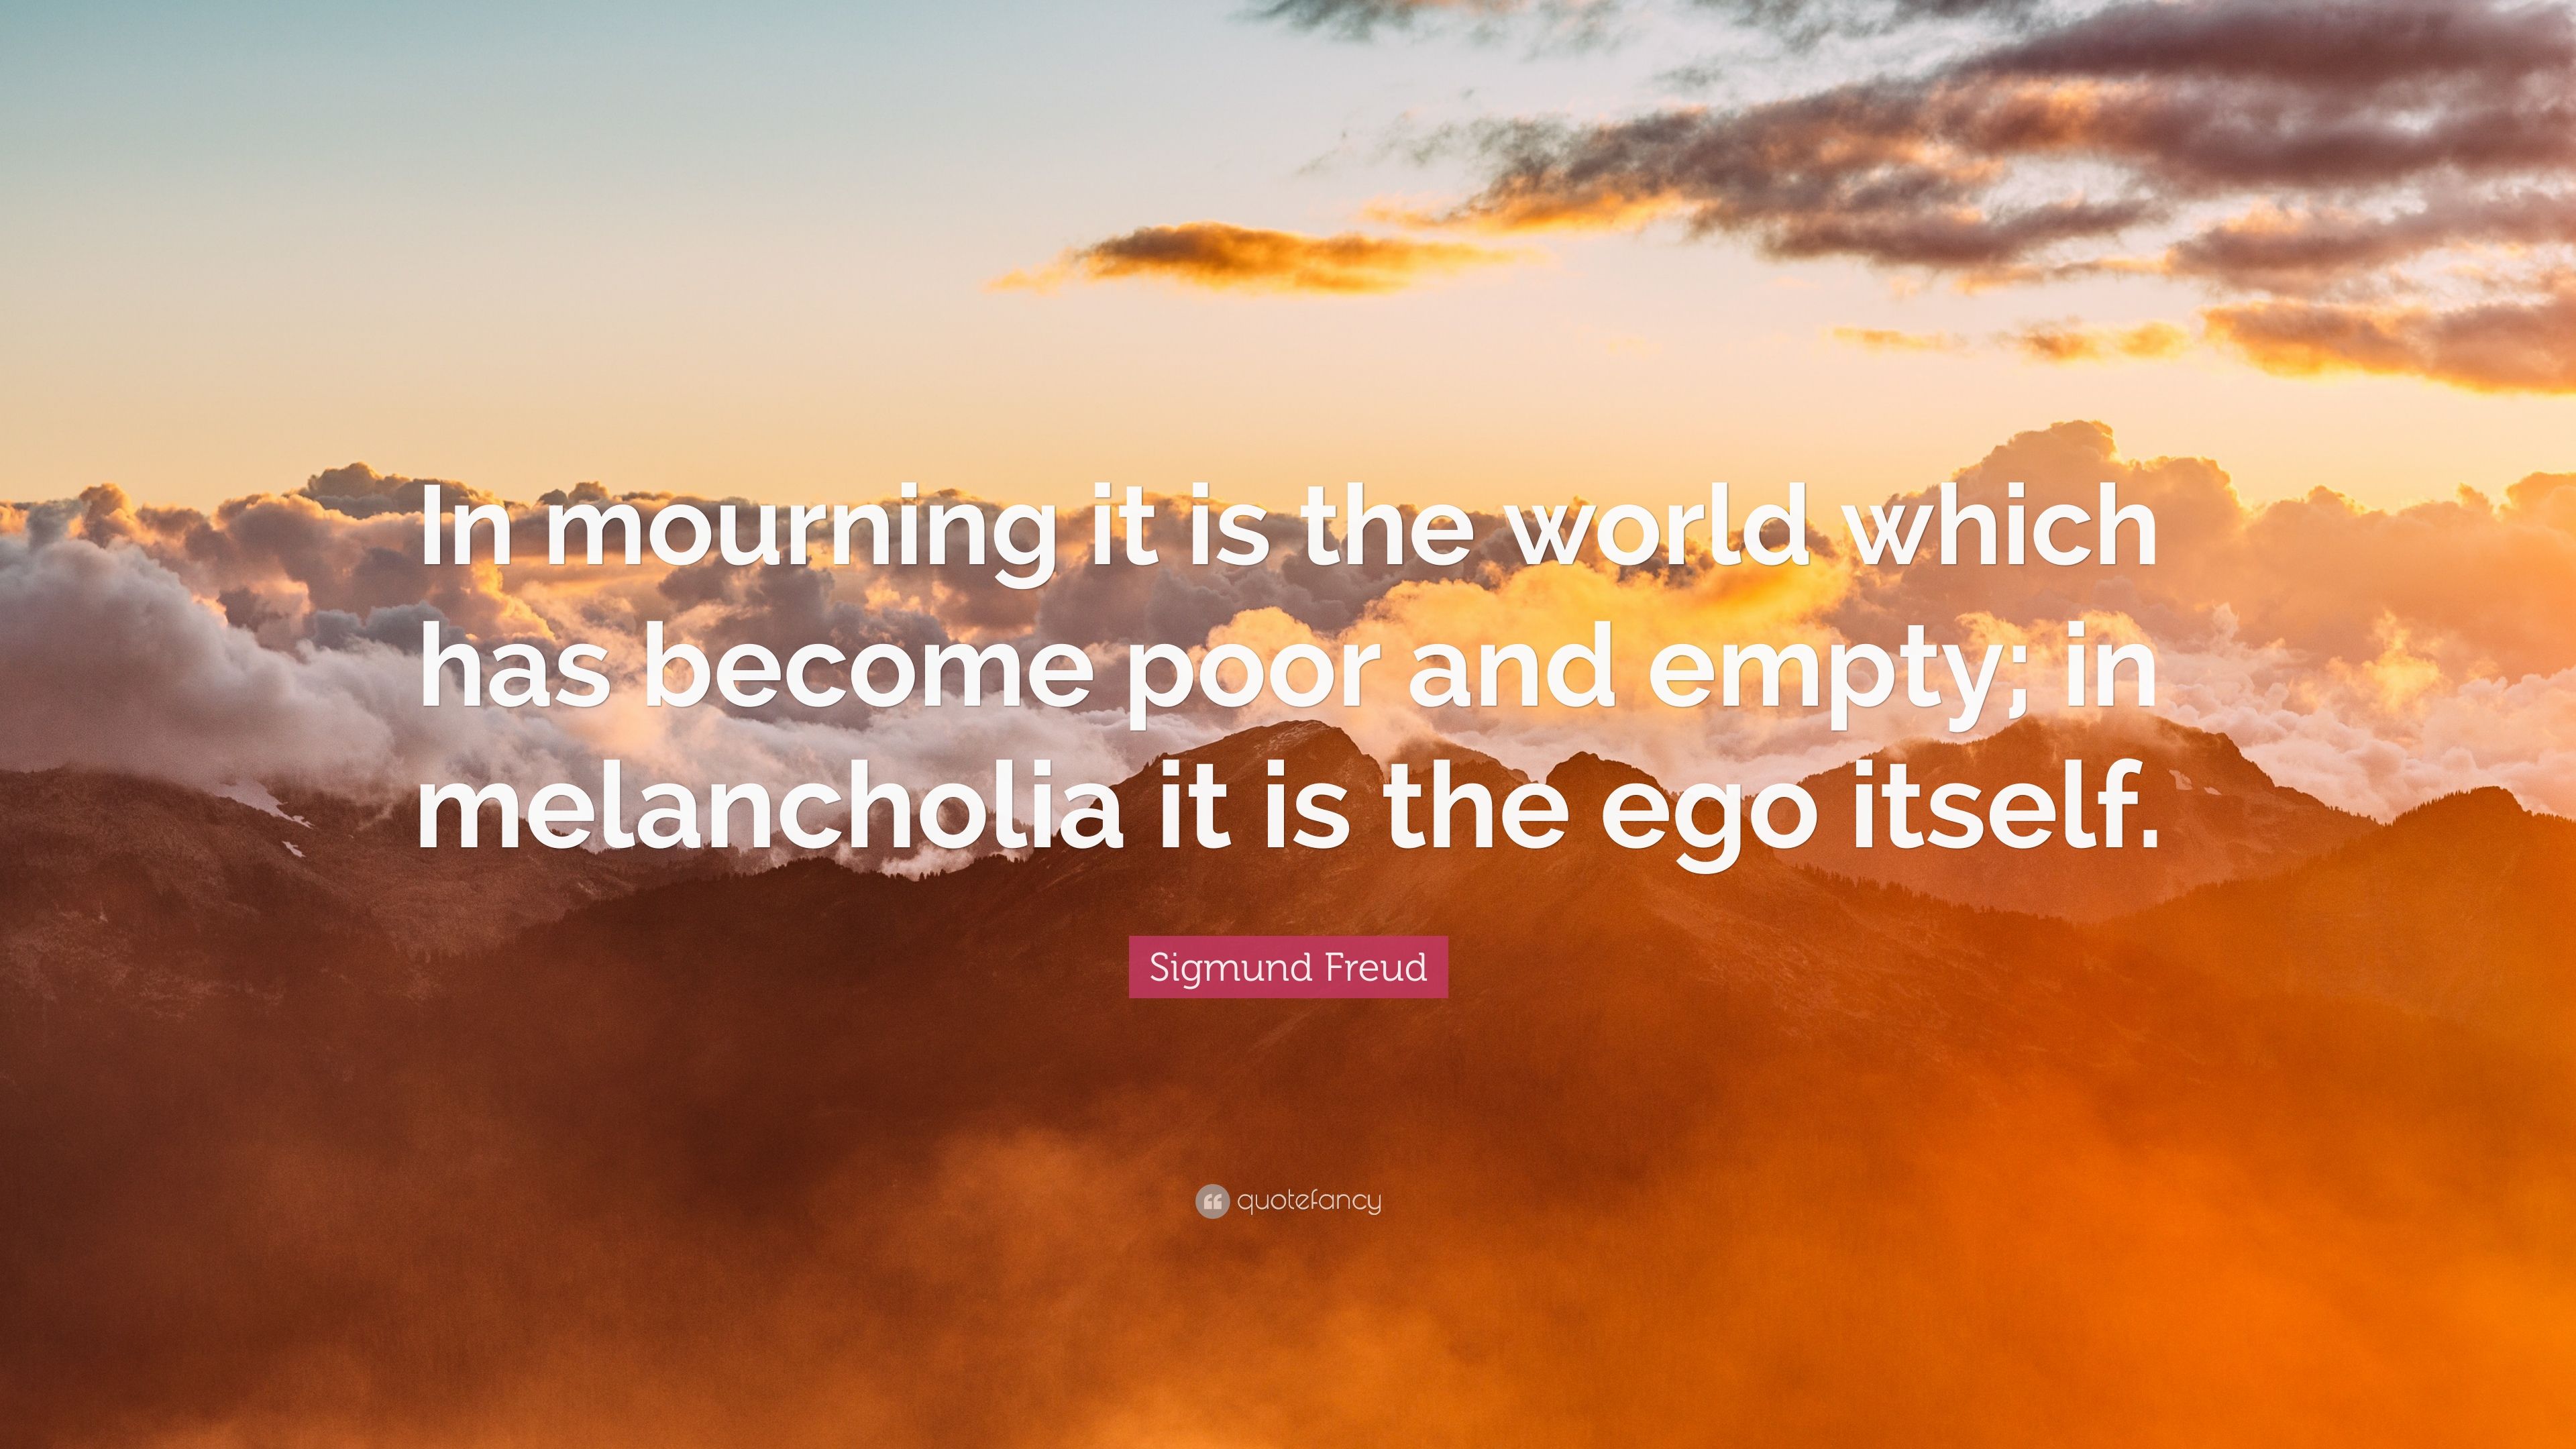 Sigmund Freud Quote: “In mourning it is the world which has become poor and empty; in melancholia it is the ego itself.” (12 wallpaper)